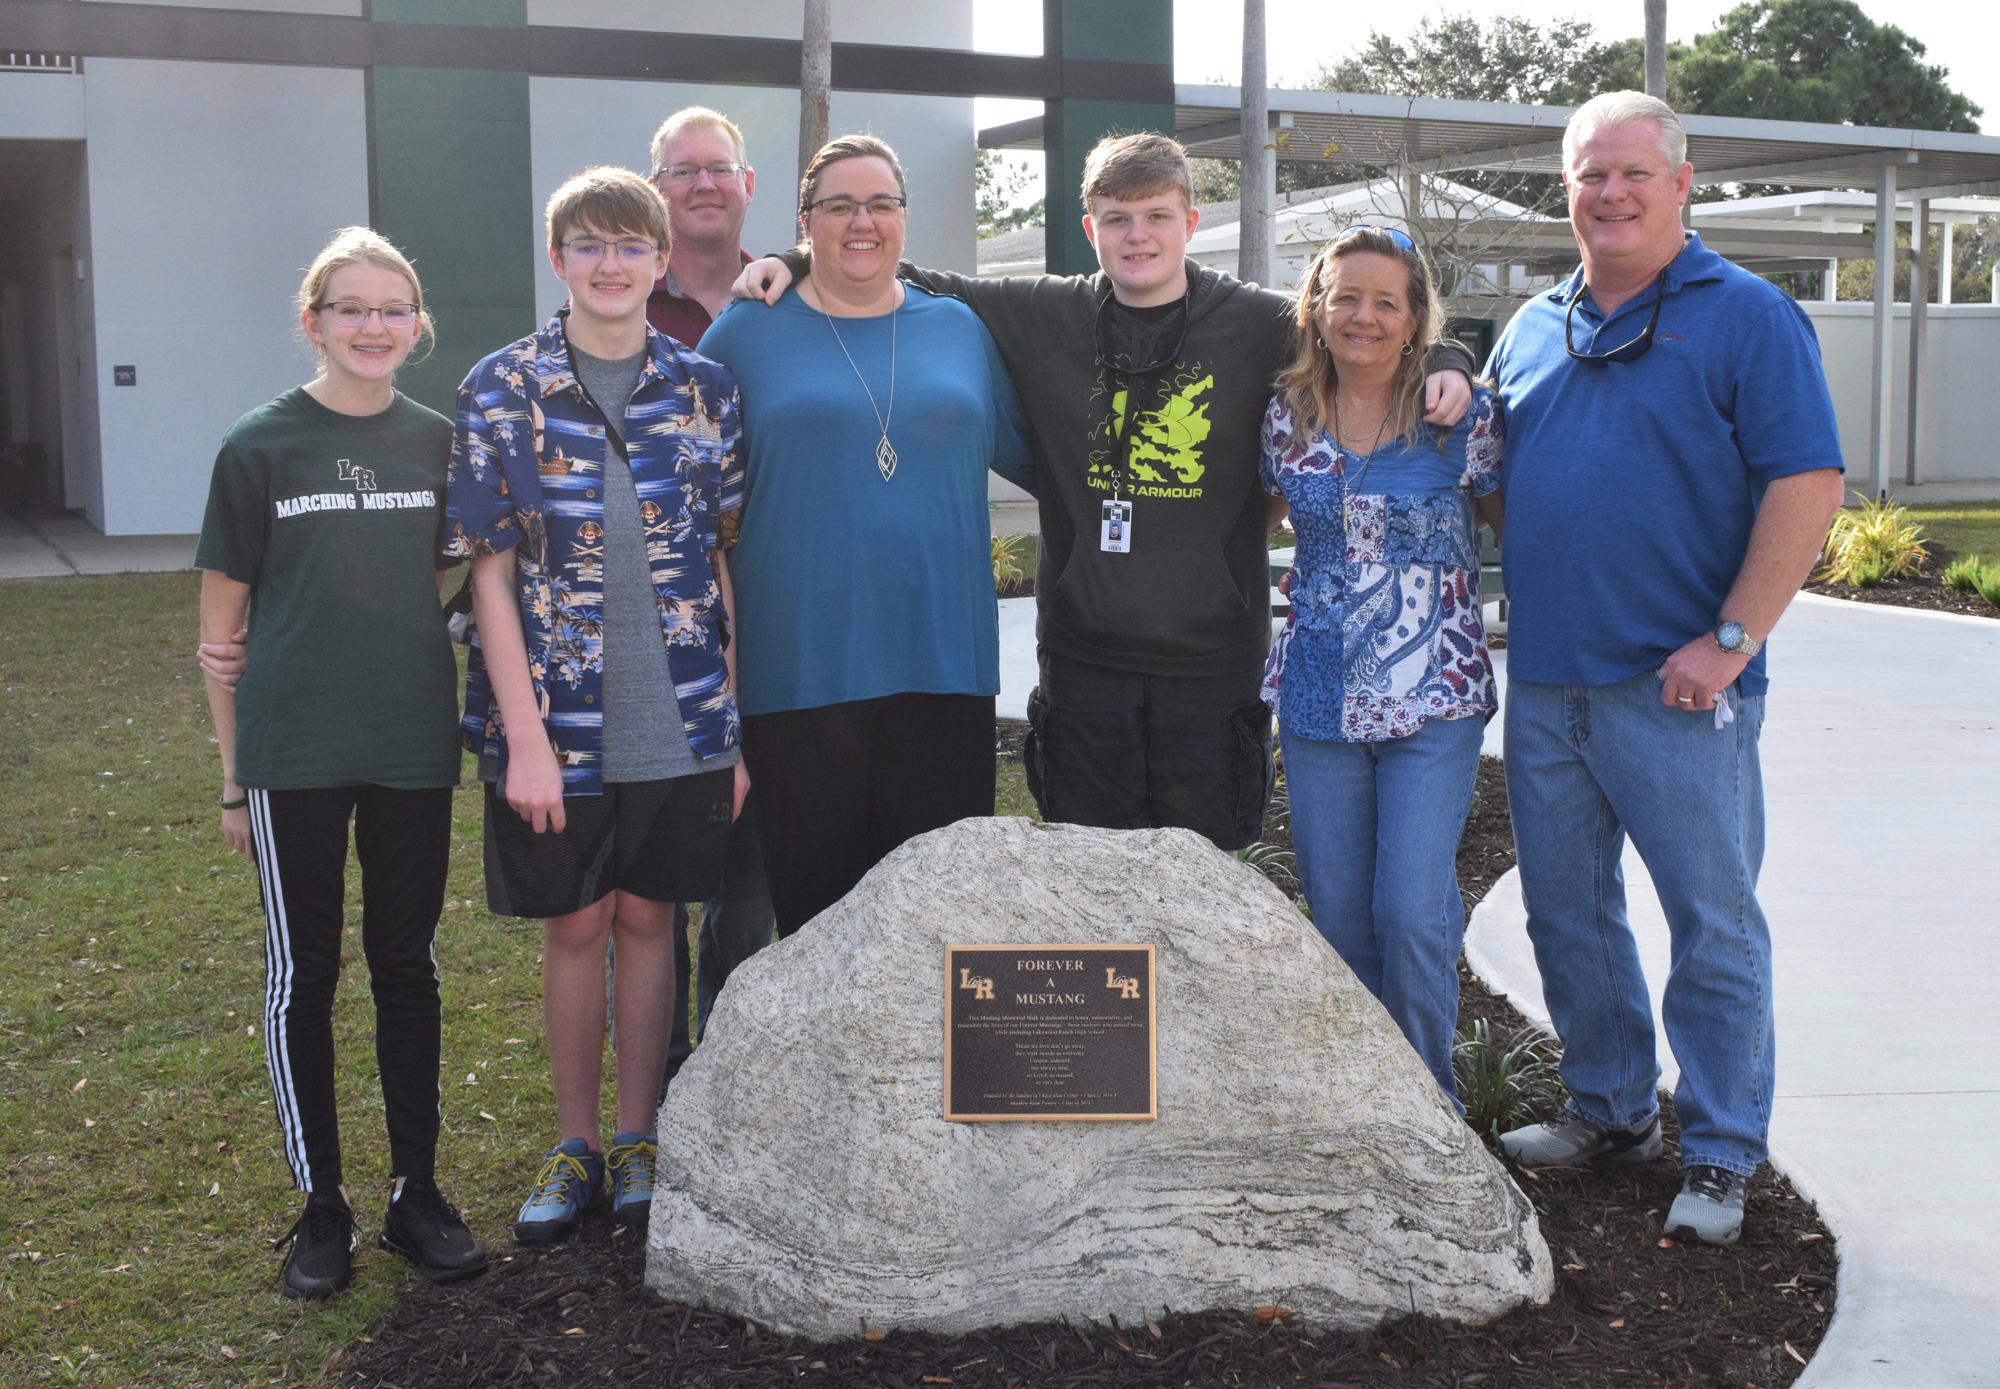 Katie Powers, Robert Powers, Dan Powers, Rebecca Powers, Cory Coyner, Shayleen Coyner and Scott Coyner have worked for nearly two years to make the Mustang Memorial Walk a reality for Lakewood Ranch High School students.